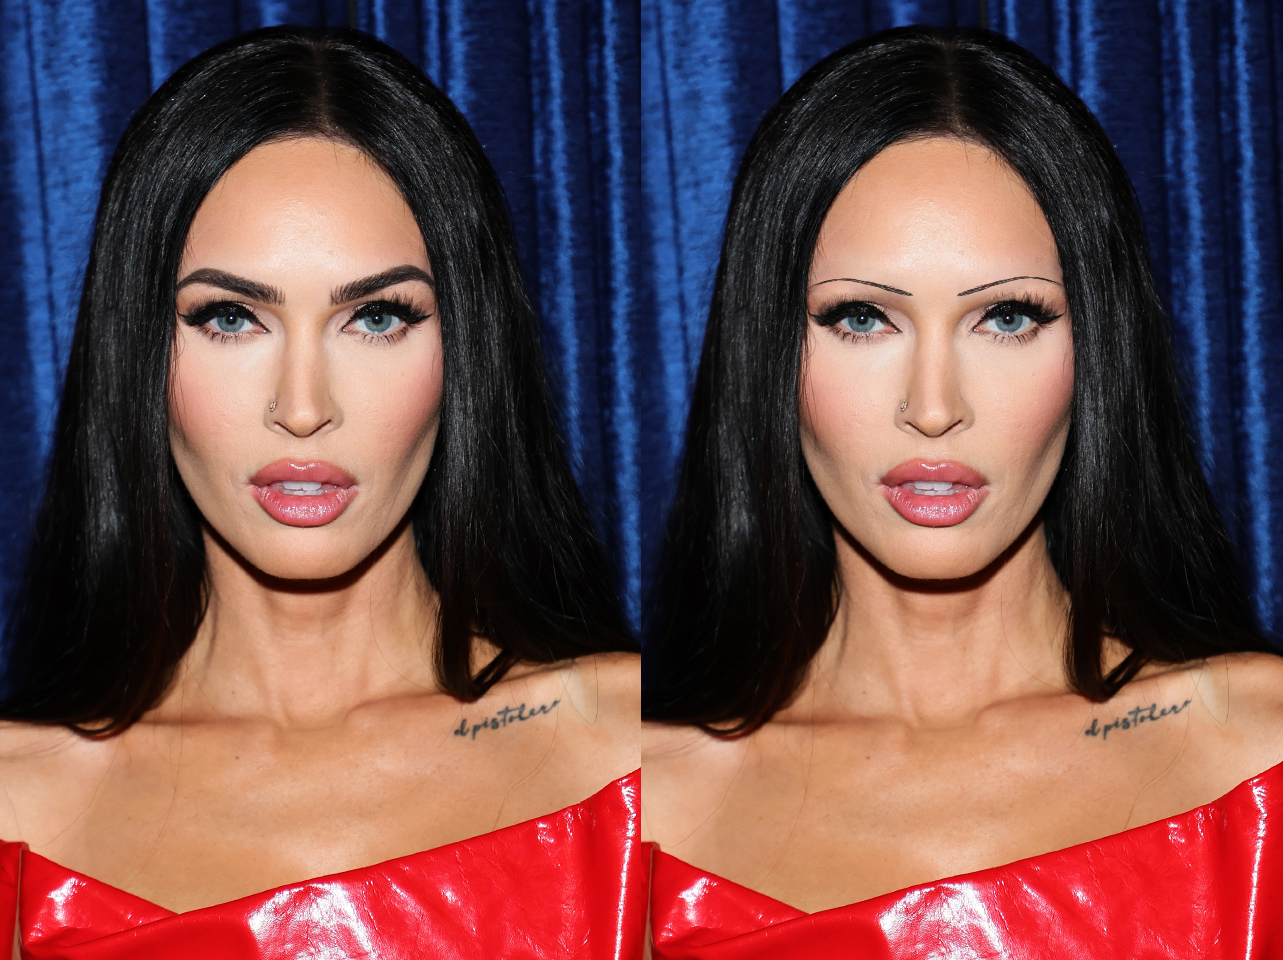 Megan Fox signature brows from 2022 vs digitally edited thin-brow look | Source: Getty Images